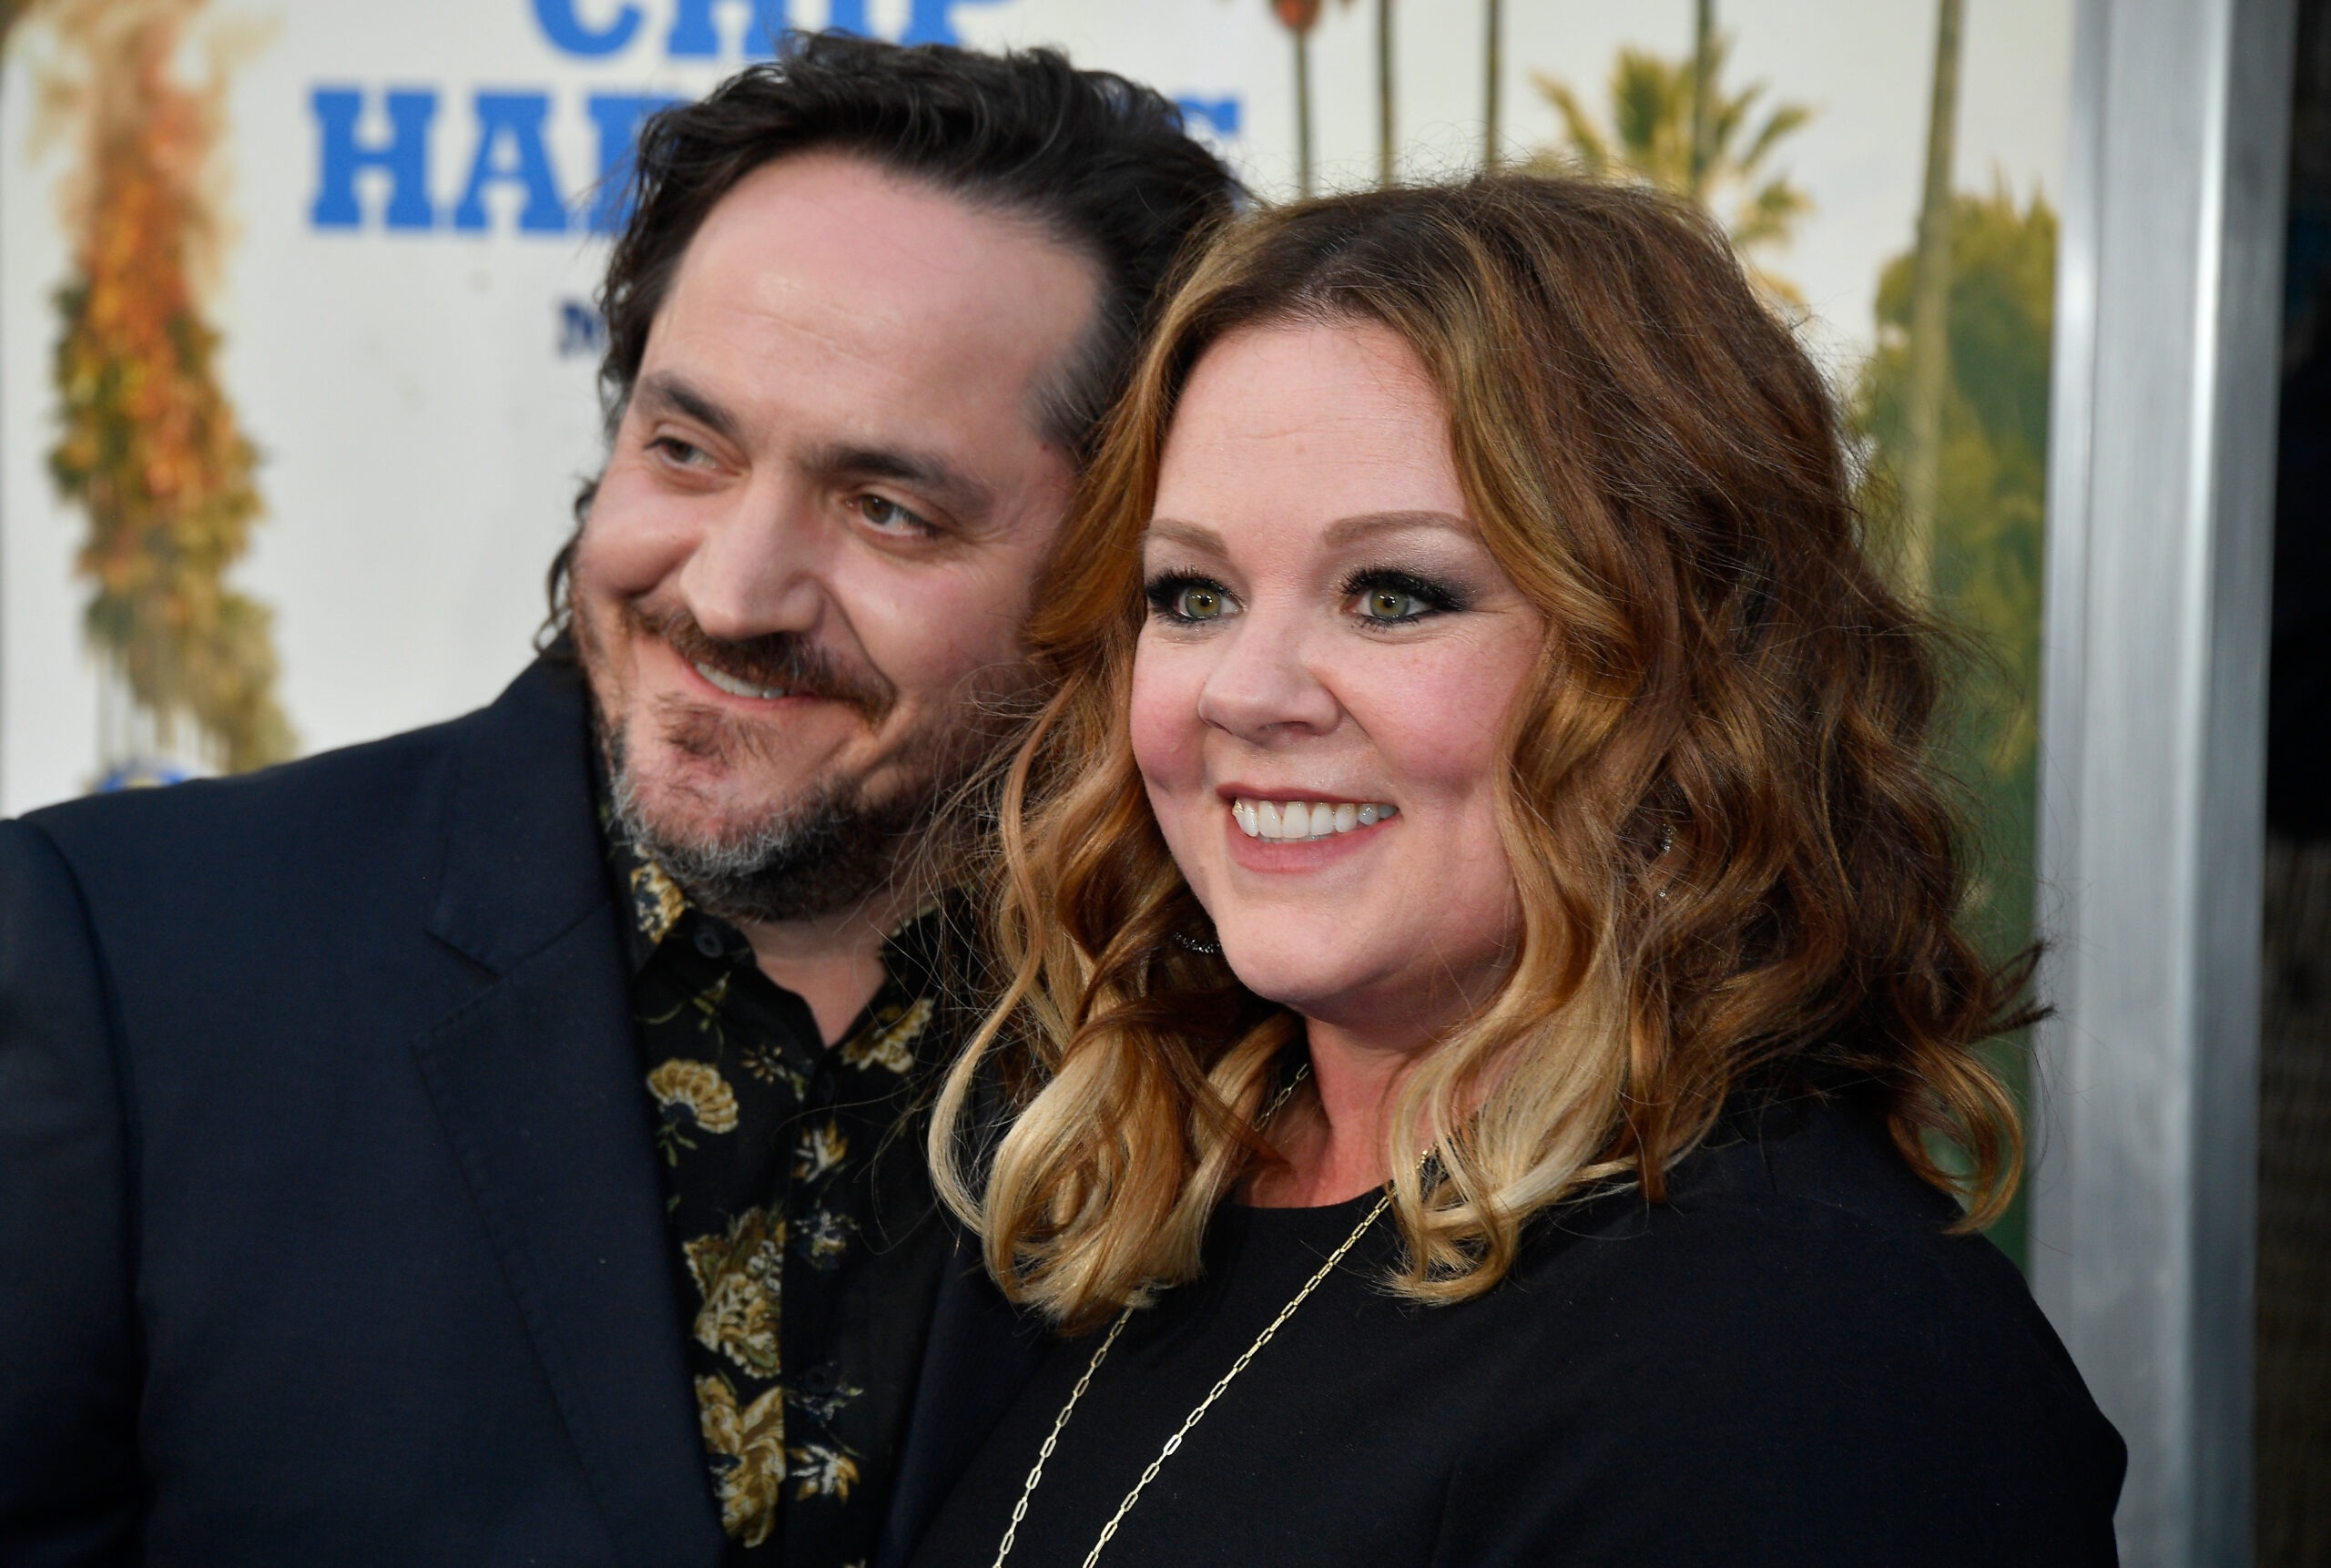 Ben Falcone and Melissa McCarthy at the premiere of "CHiPS" in Hollywood, California on March 20, 2017 | Source: Getty Images